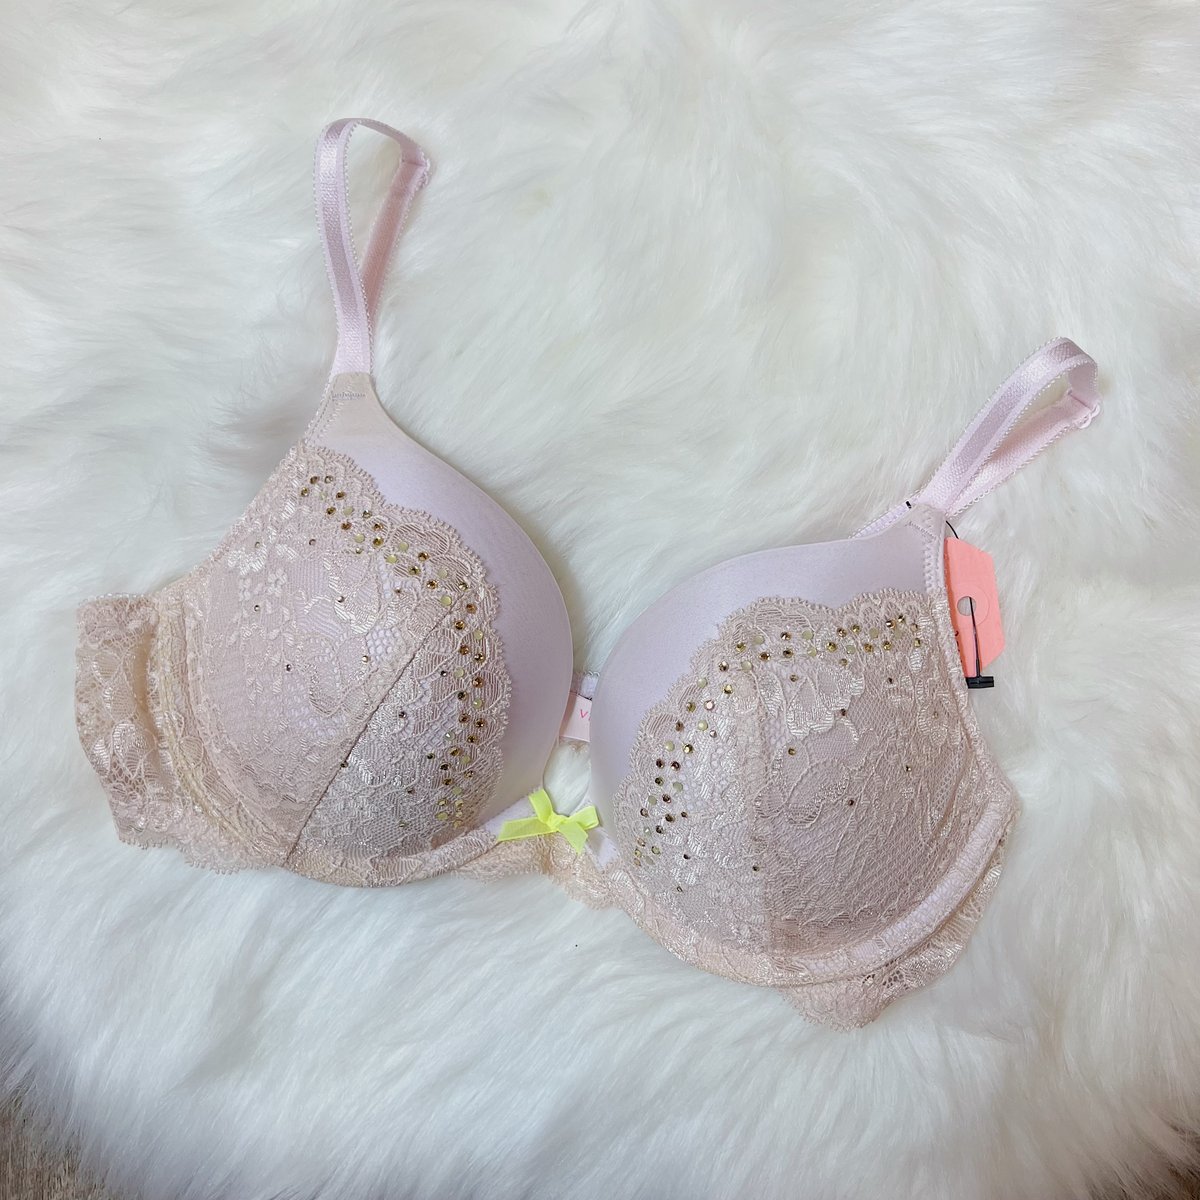 Victoria's Secret Dream Angels VINTAGE Padded Push-up bling bra 38D (N1)  Size undefined - $25 - From Isabel